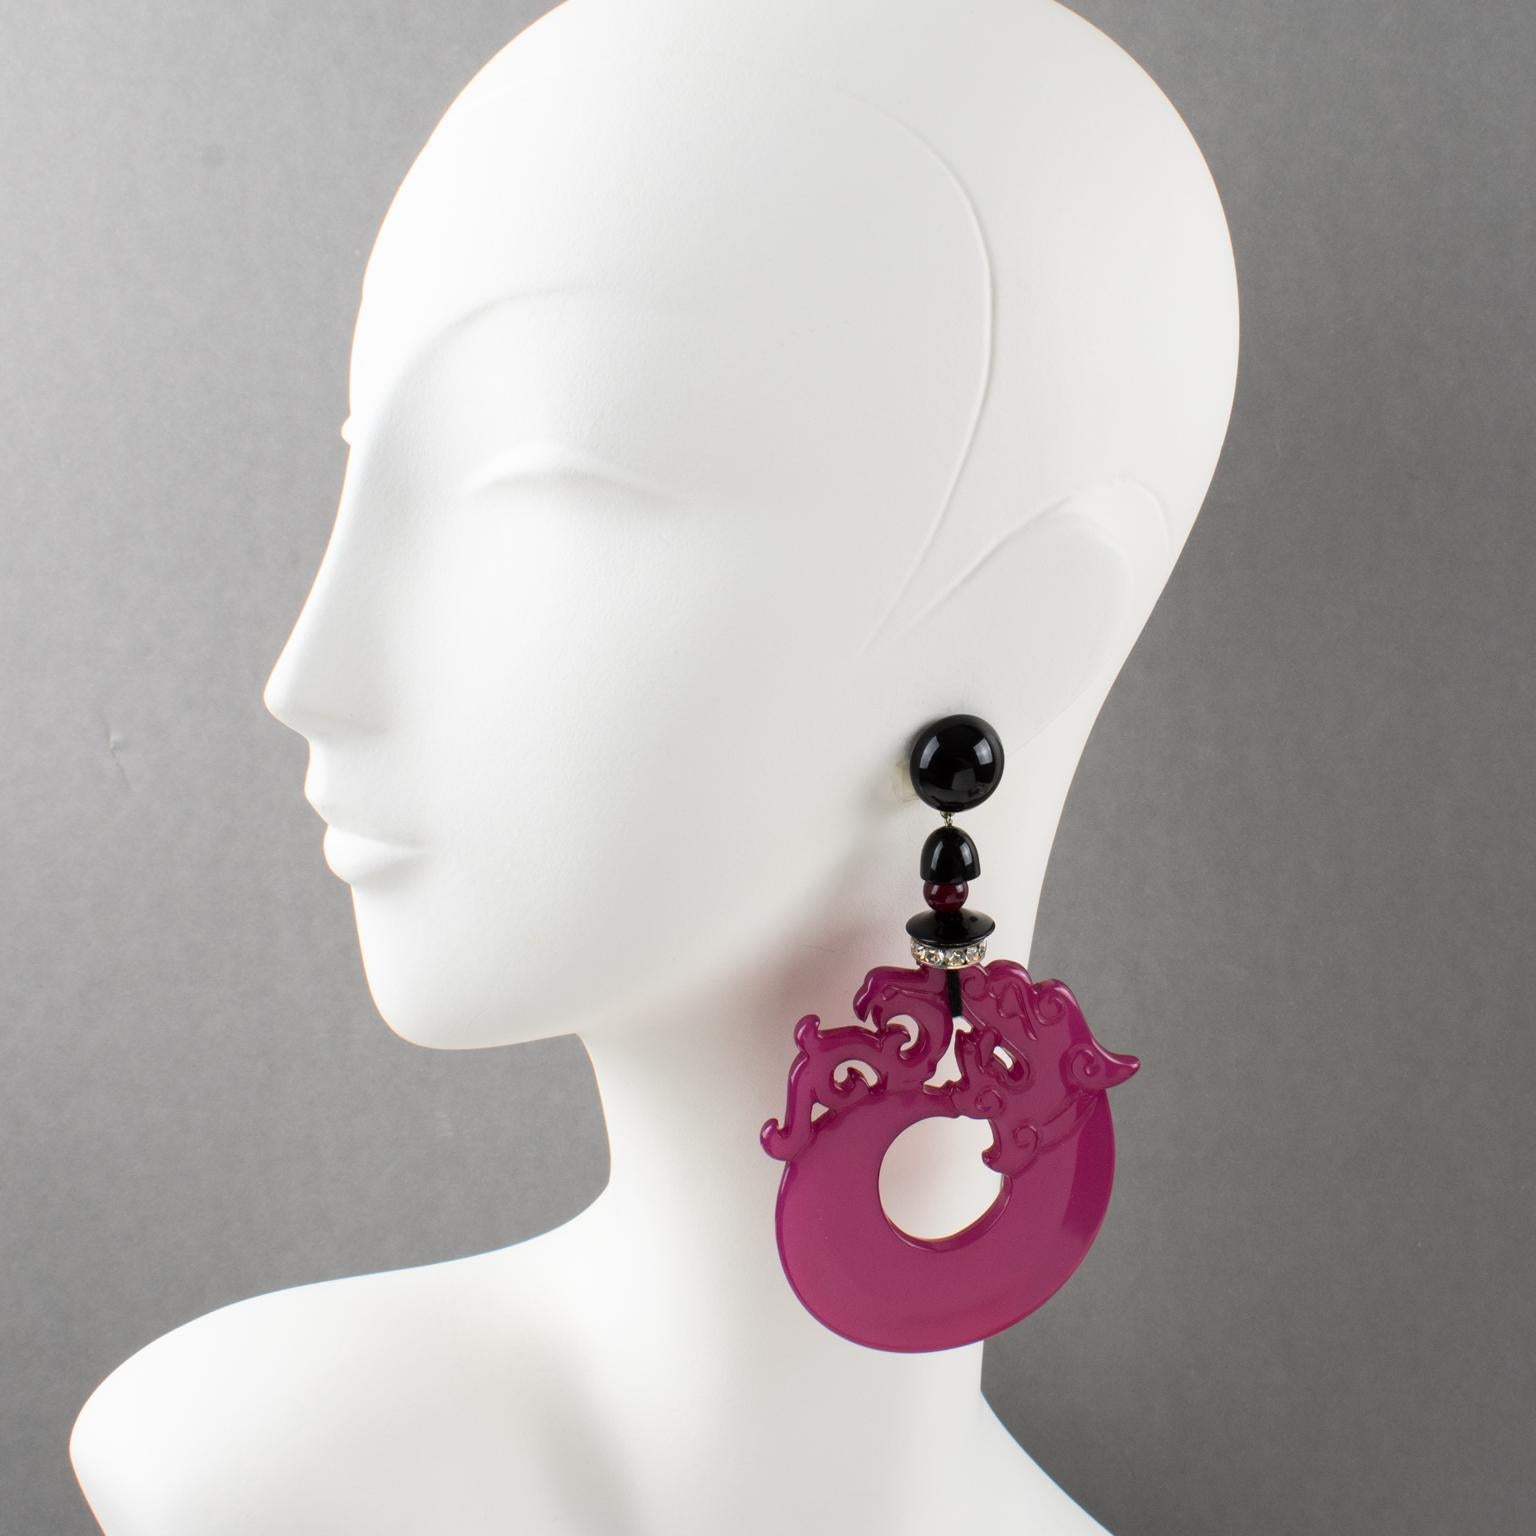 Impressive oversized Angela Caputi, Italy dangling clip-on earrings. Dimensional statement shape working on black color contrasted with magenta purple and crystal rhinestones spacer ring. A huge resin dragon-shaped element builds in an extra-large